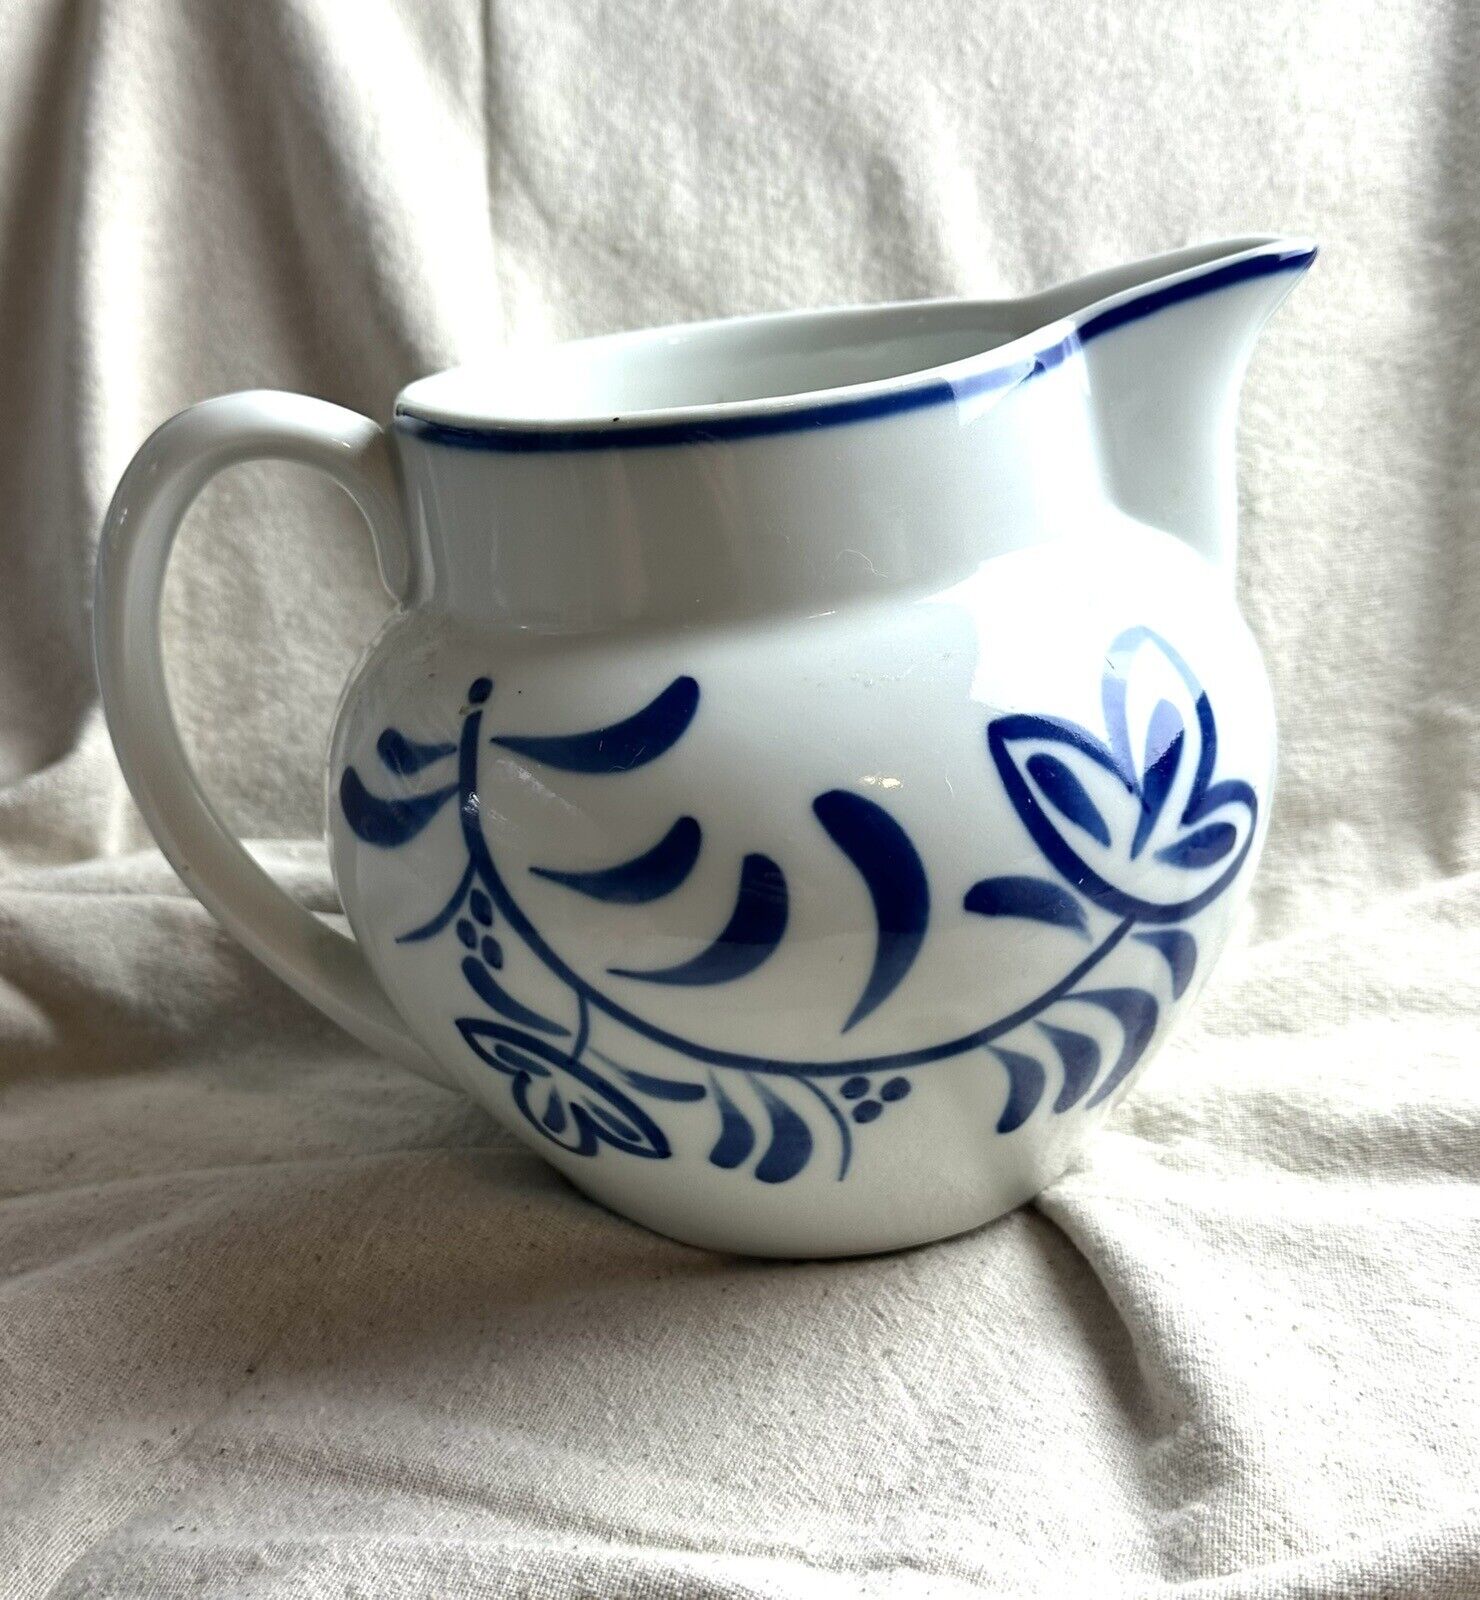 Viana Do Castelo Hand Painted Pitcher, Portugal, preowned, signed Madalena